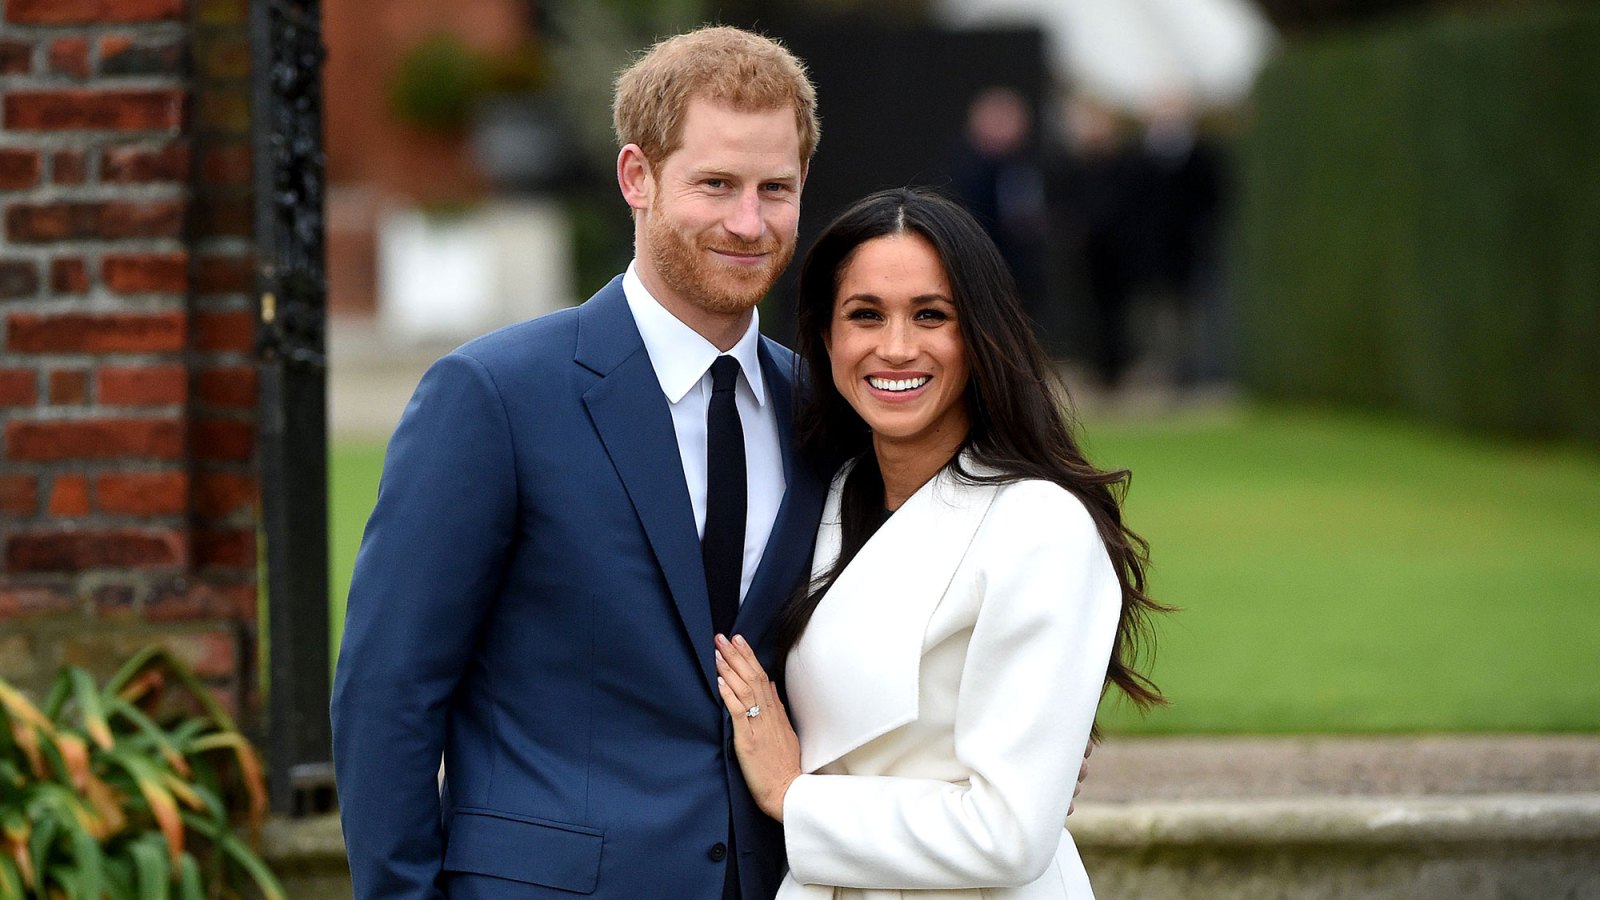 Prince Harry and Meghan Markle Break Royal Protocol With 2020 Election Video